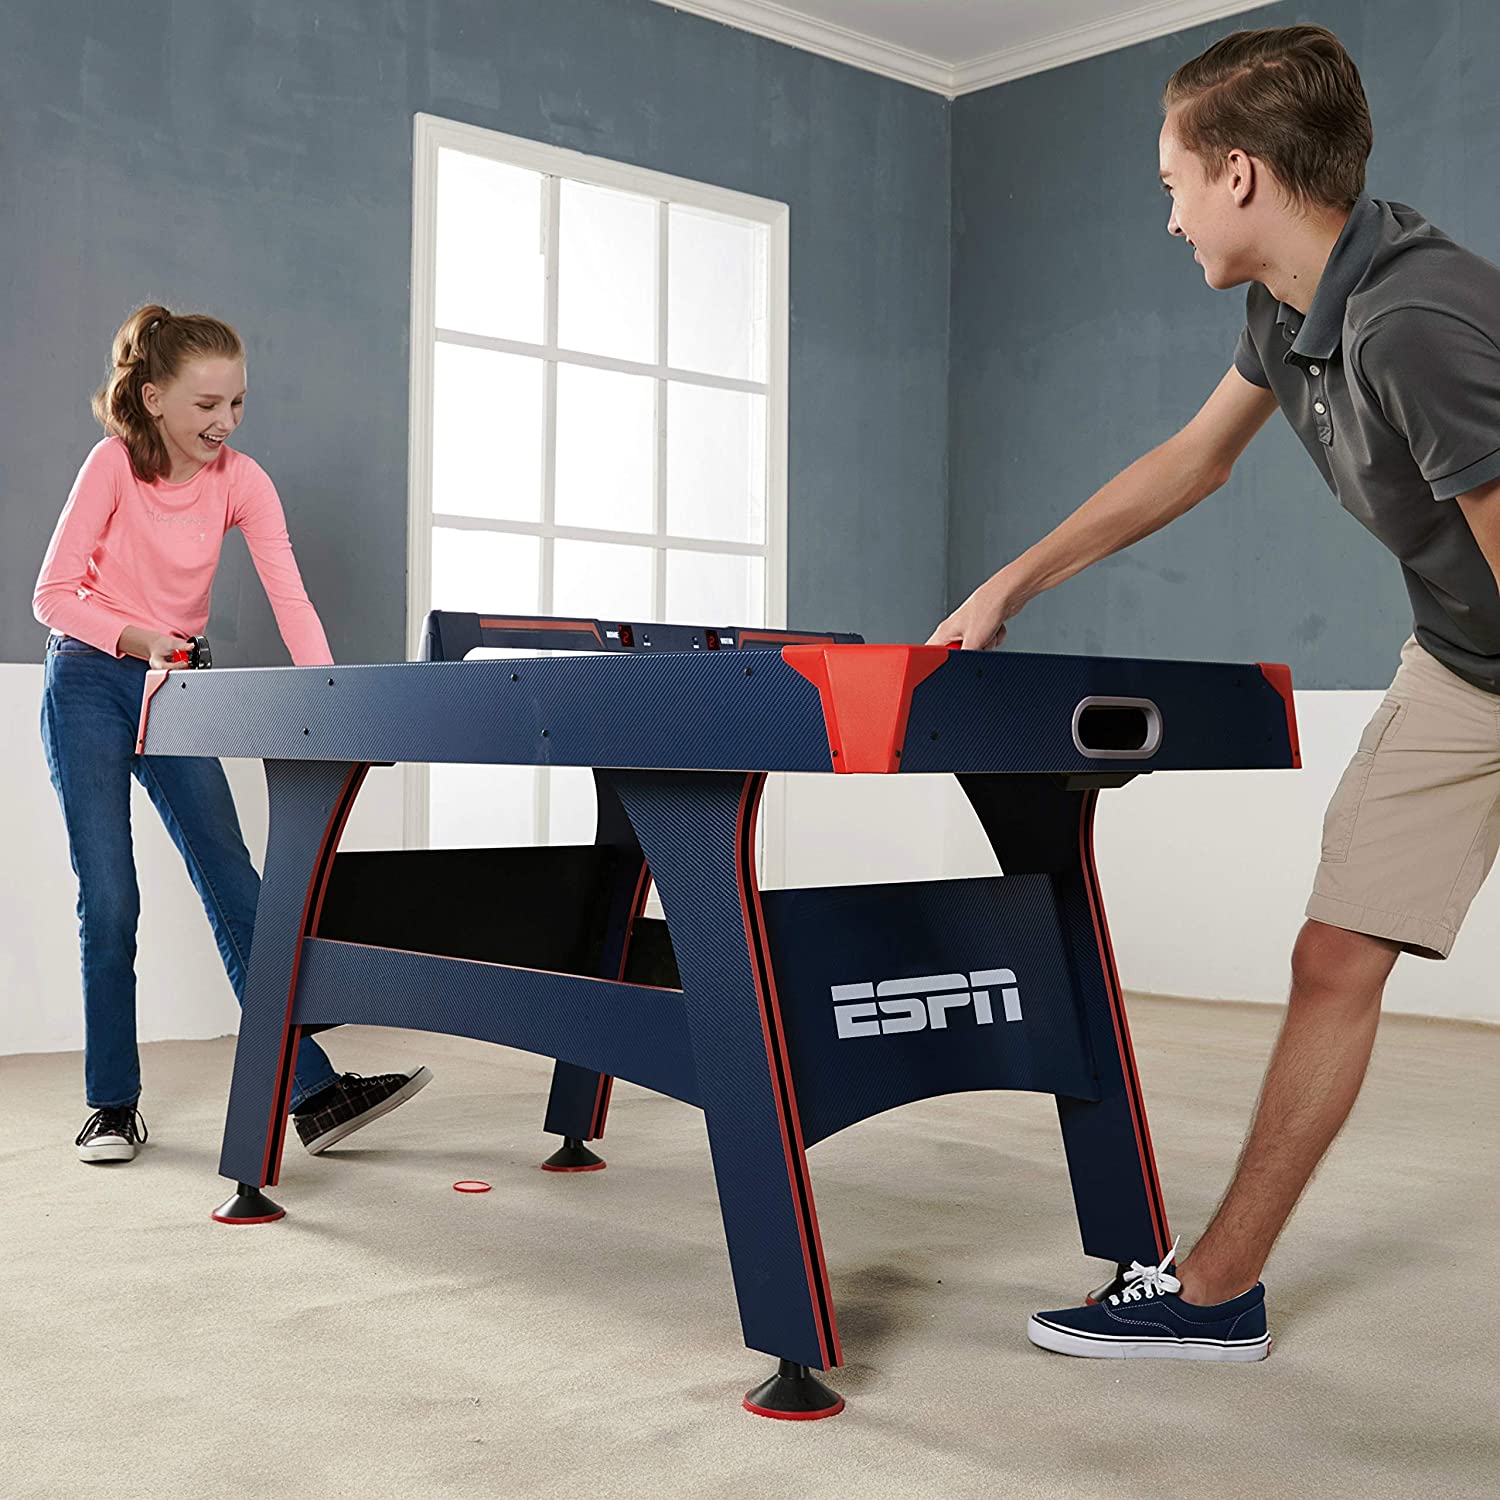 Two kids playing on a ESPN 5' Air Powered Hockey Table